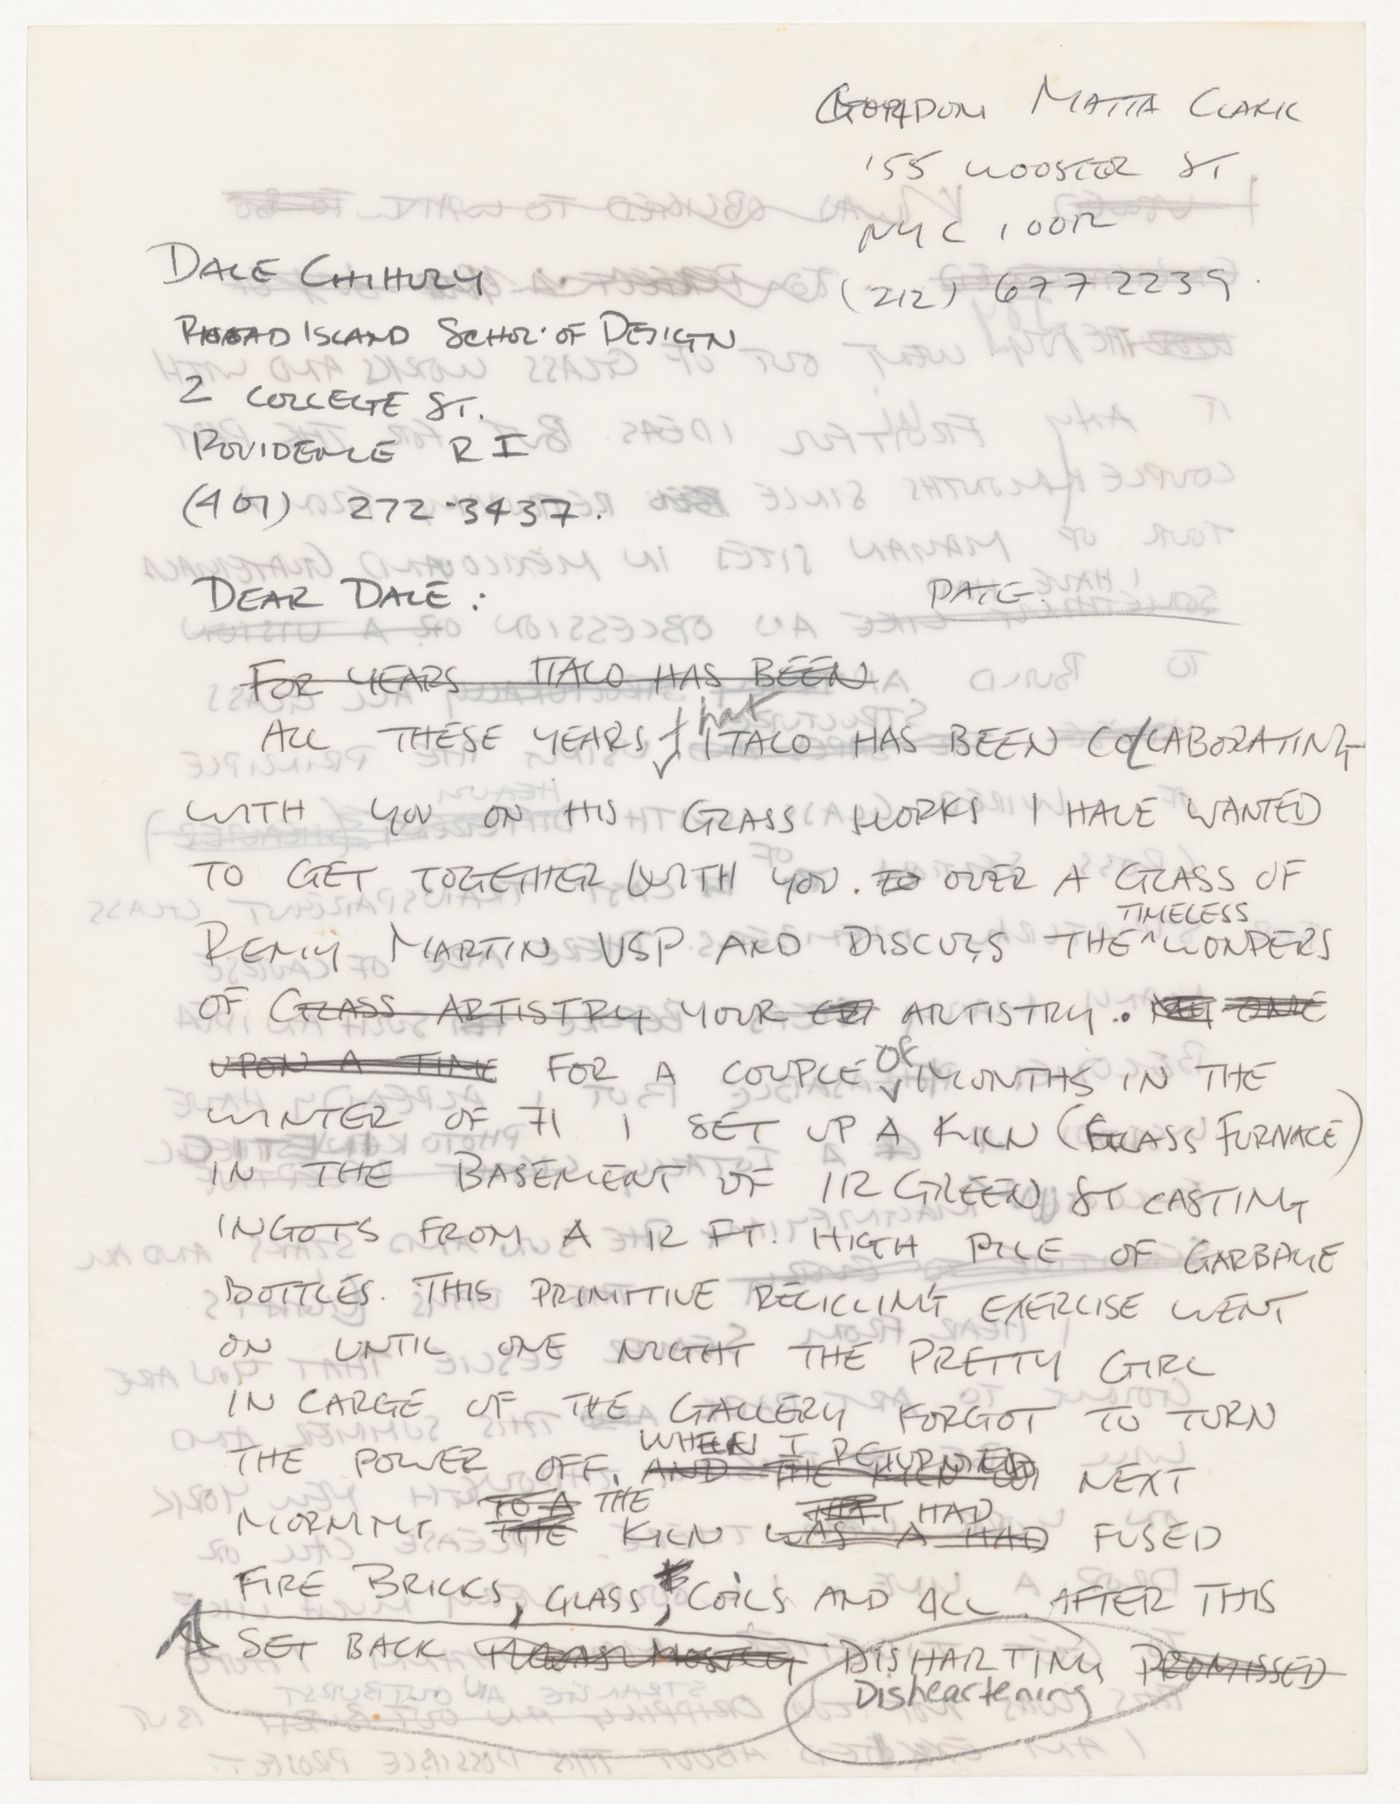 Letter from Gordon Matta-Clark to Dale Chihuly